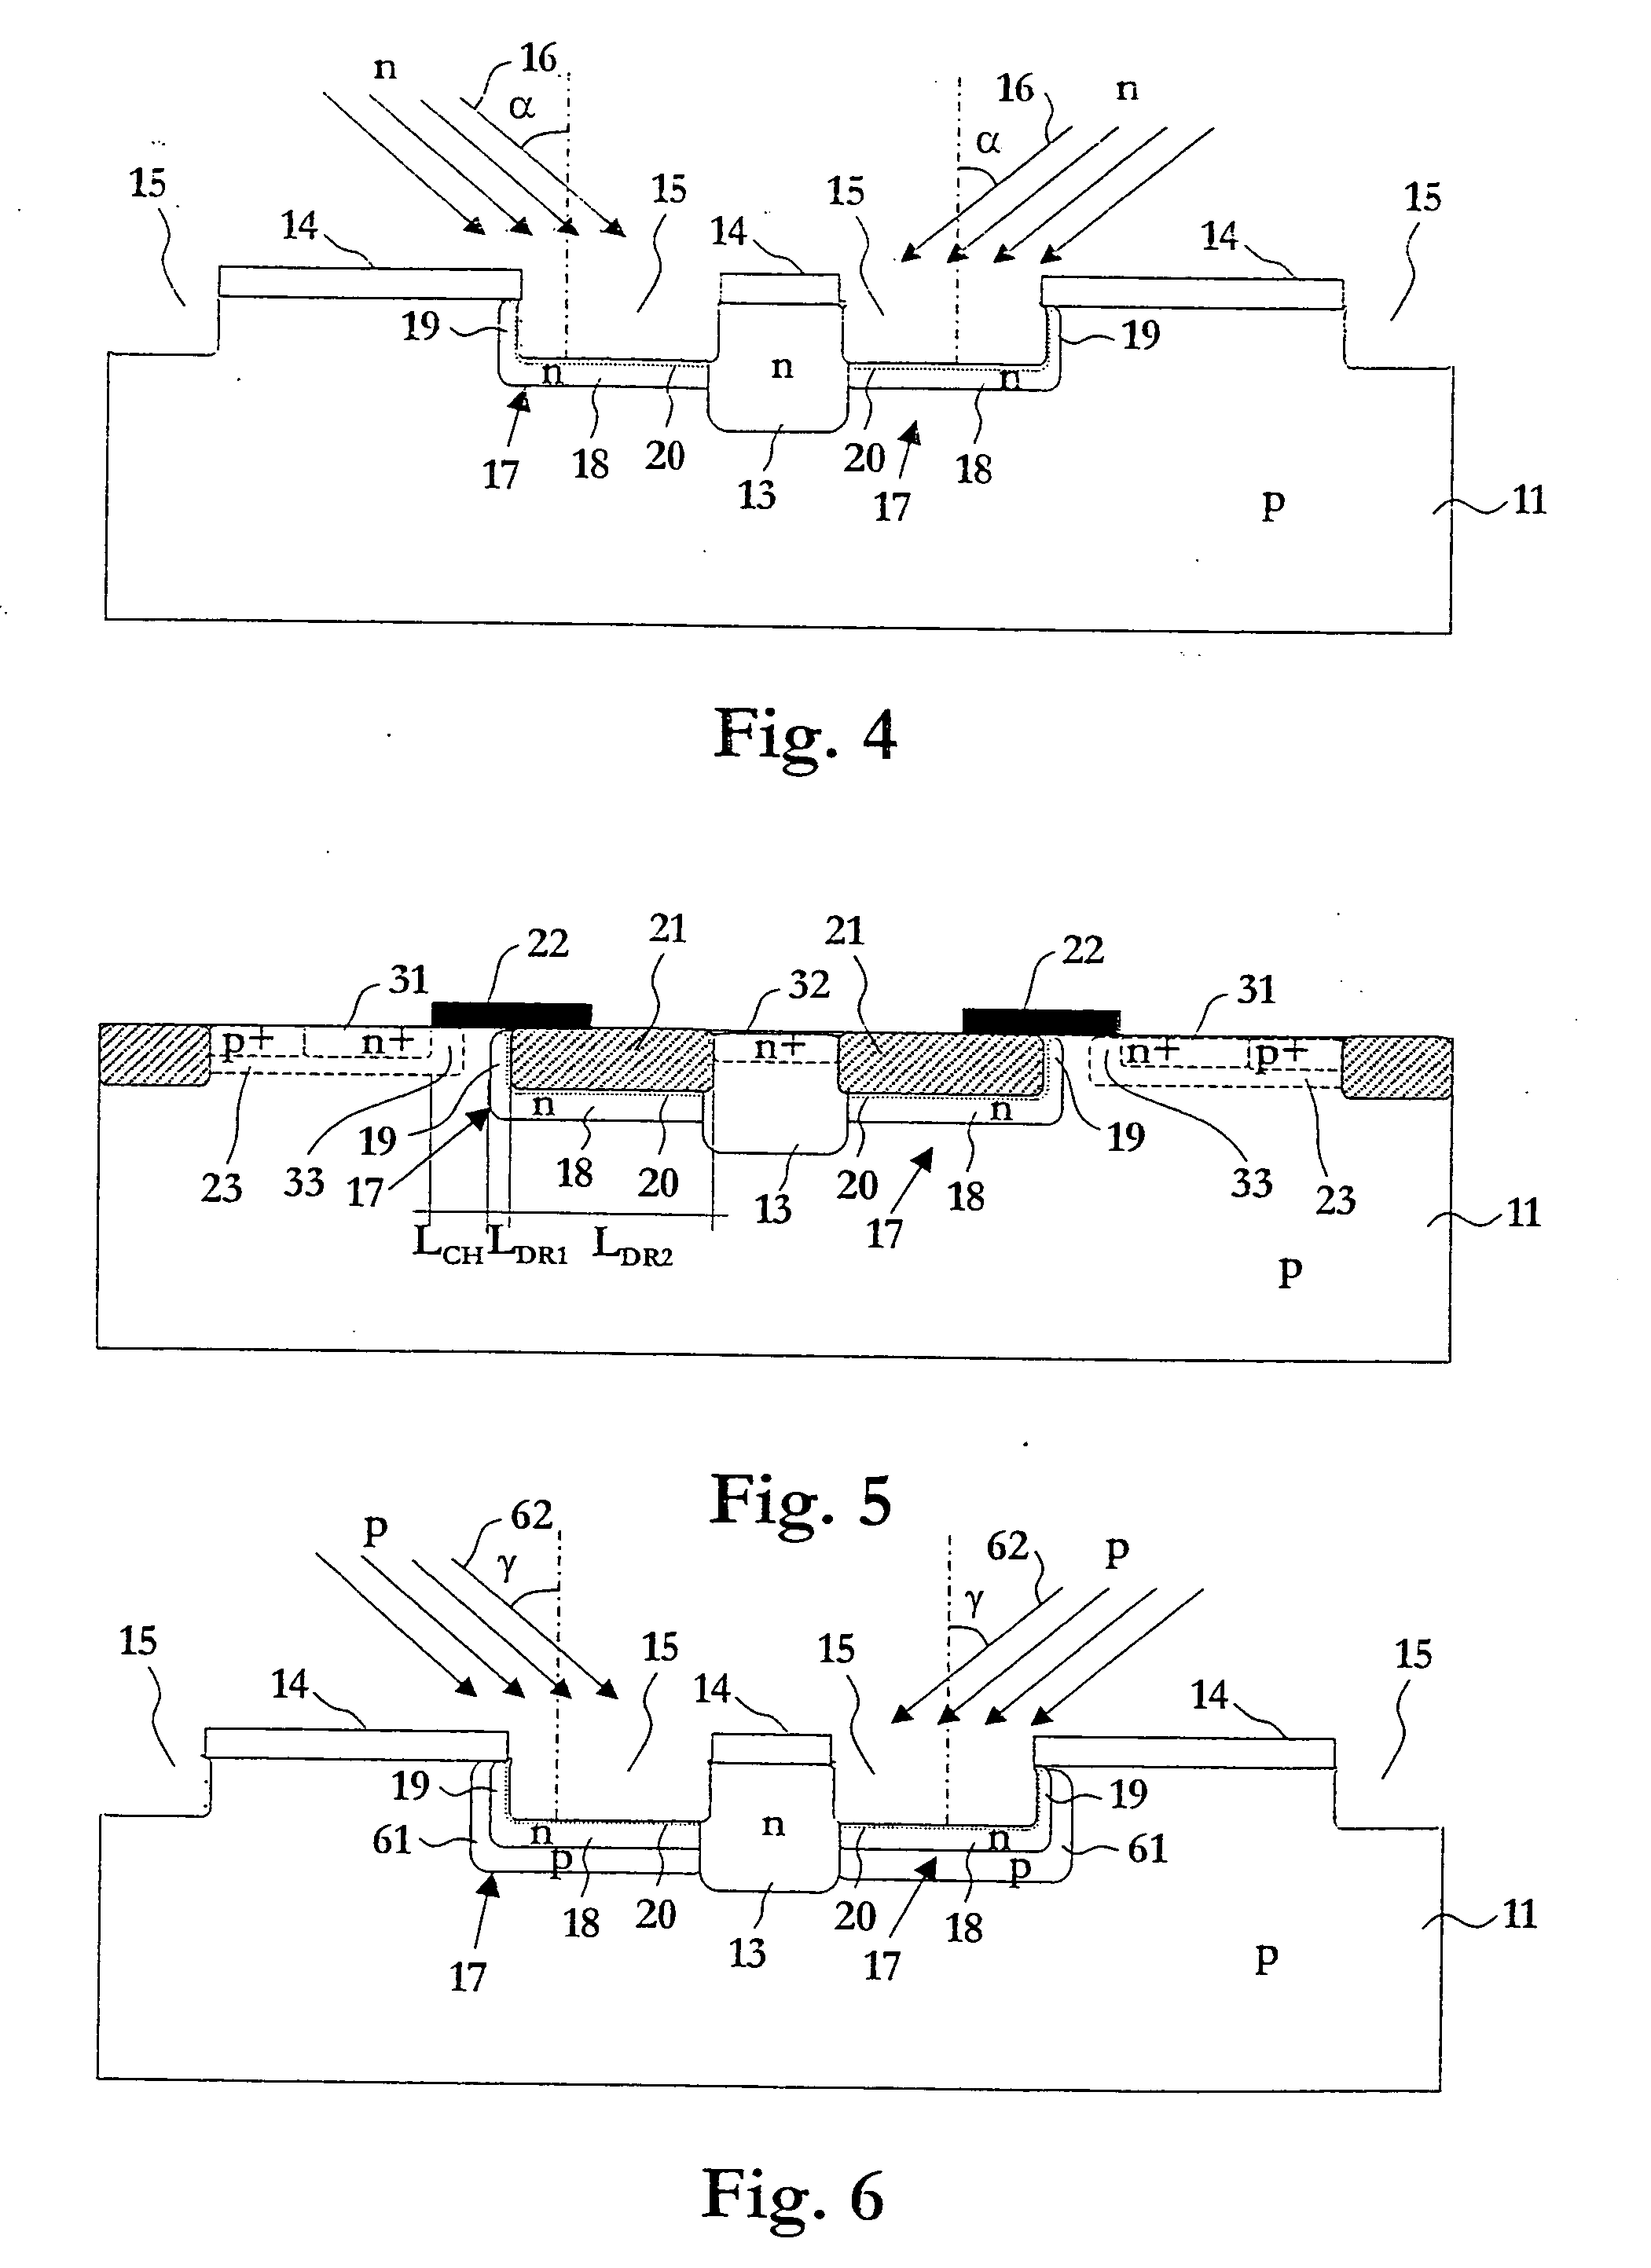 Method in the fabrication of a monolithically integrated high frequency circuit